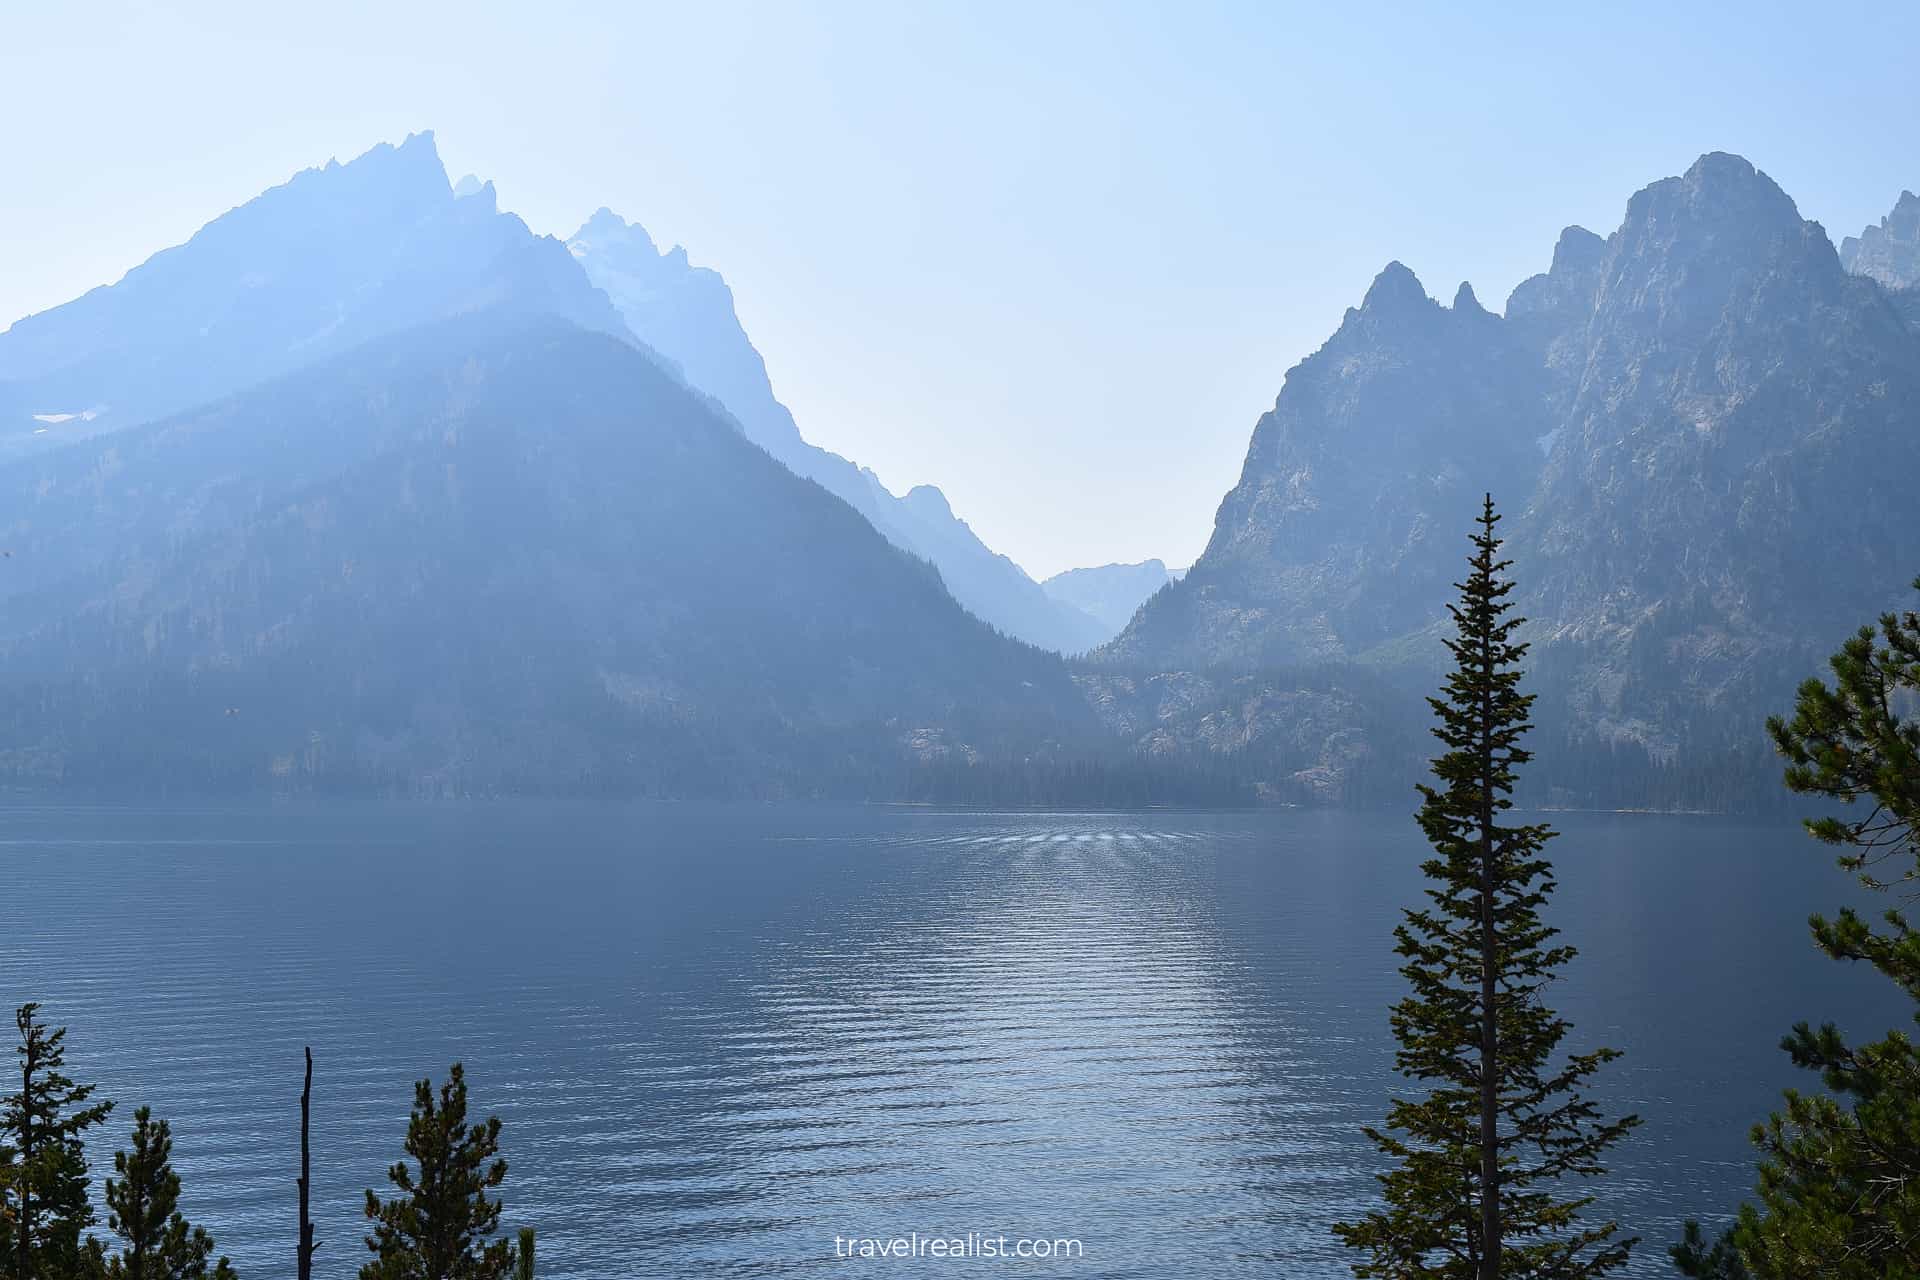 Grand Teton and Middle Teton Peaks as viewed from Jenny Lake Overlook in Grand Teton National Park, Wyoming, US